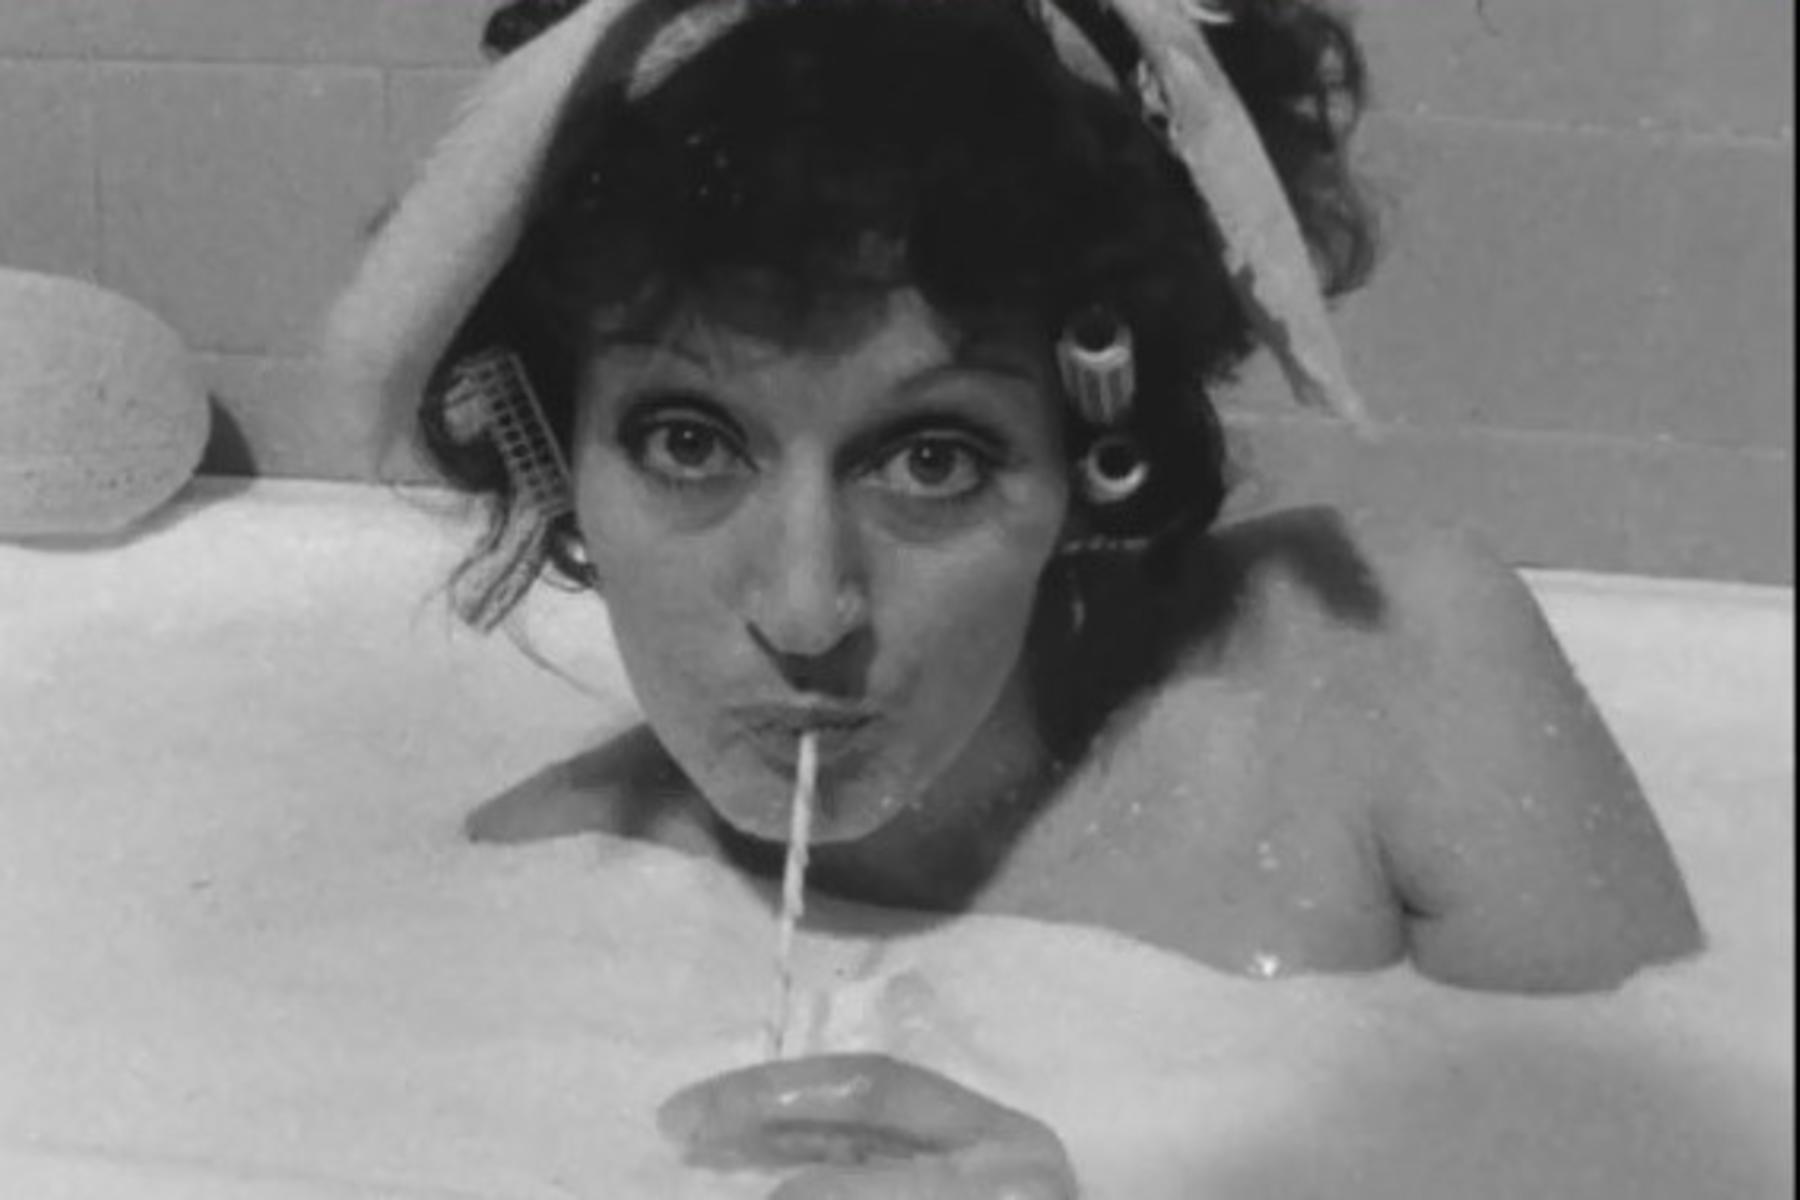 Black white film still of Germaine Greer immerser in bathtub filled with milk with straw in mouth